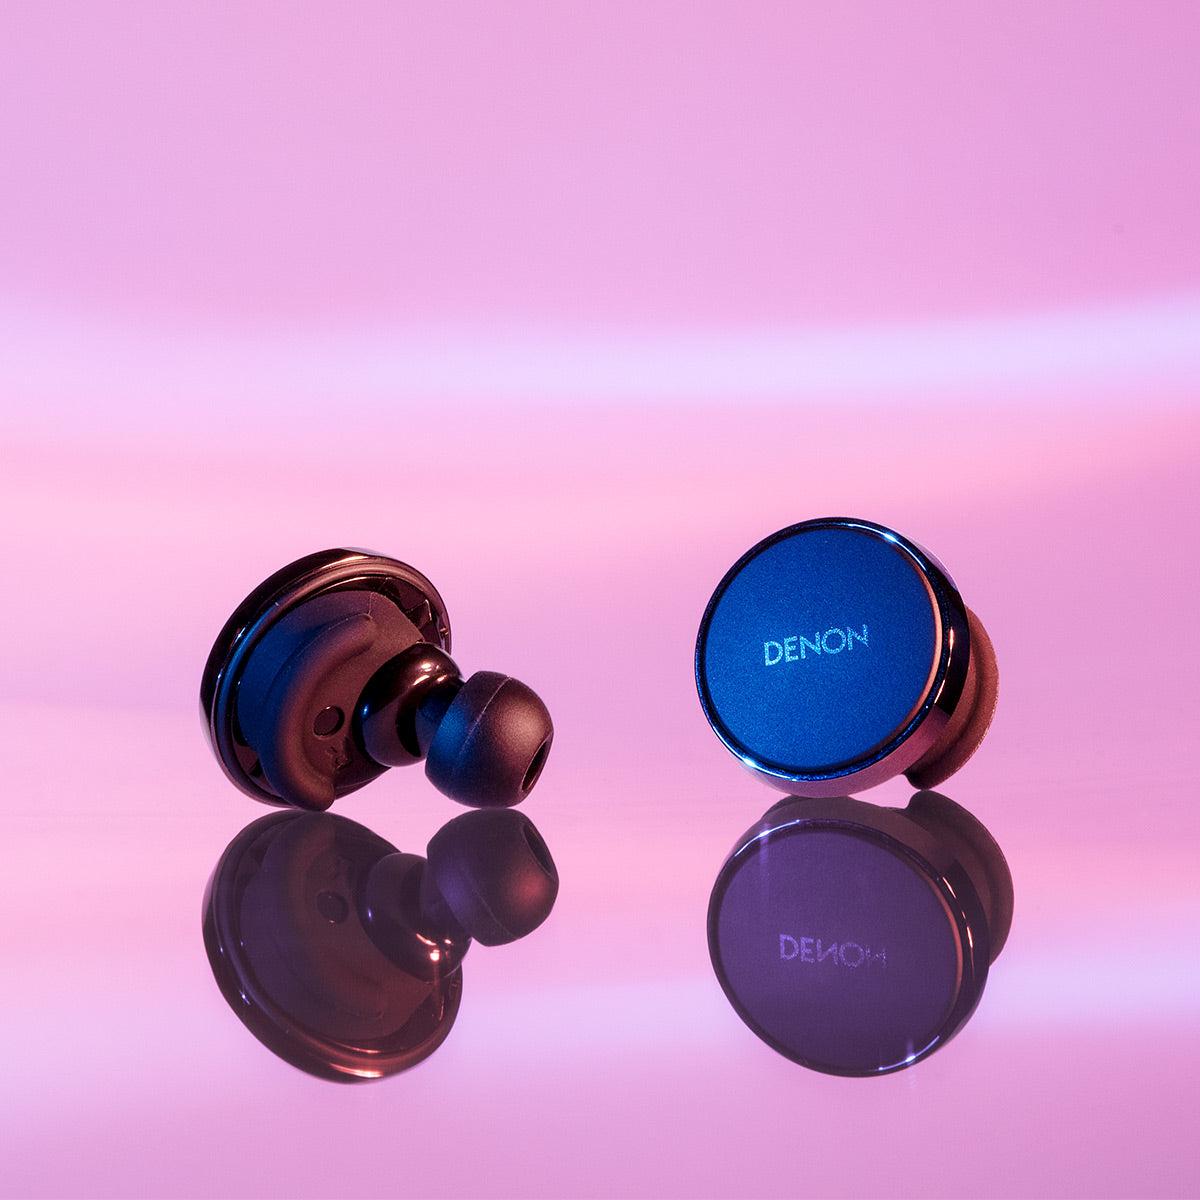 Denon PerL Pro True Wireless Earbuds with Active Noise Cancellation, Spatial Audio, and Adaptive Acoustic Technology